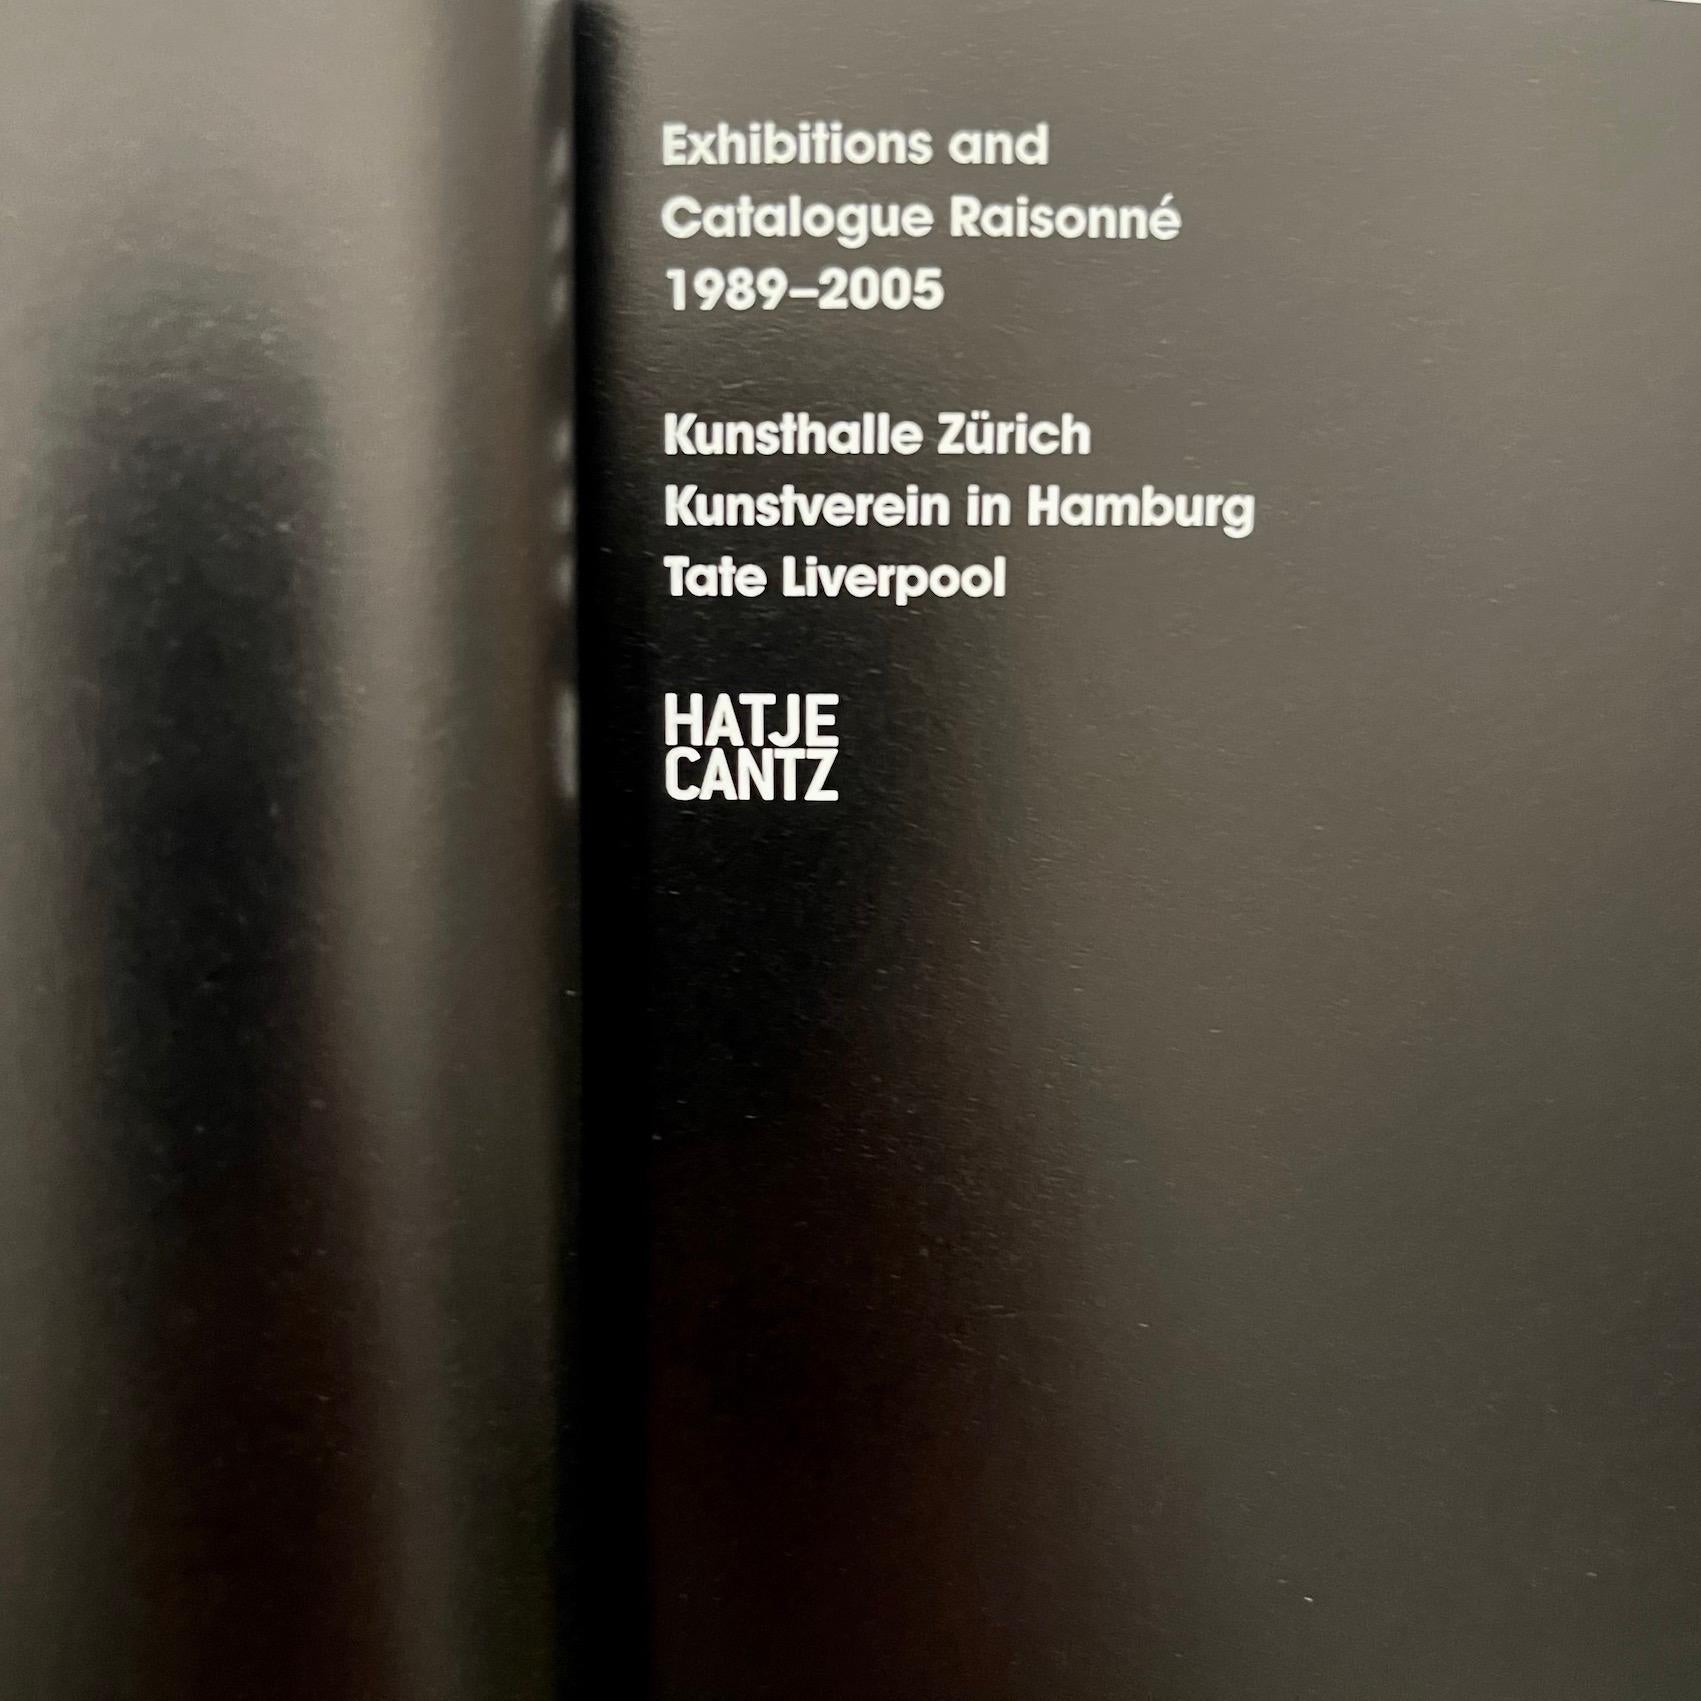 Yilmaz Dziewior, Kunstverein in Hamburg, Beatrix Ruf, Kunsthalle Zürich, Sadie Coles and Martin Prinzhorn, 2005Publisher: Hatje Cantz

This monograph features an extensive overview of the unusual photographs, sculptures and installations by Sarah